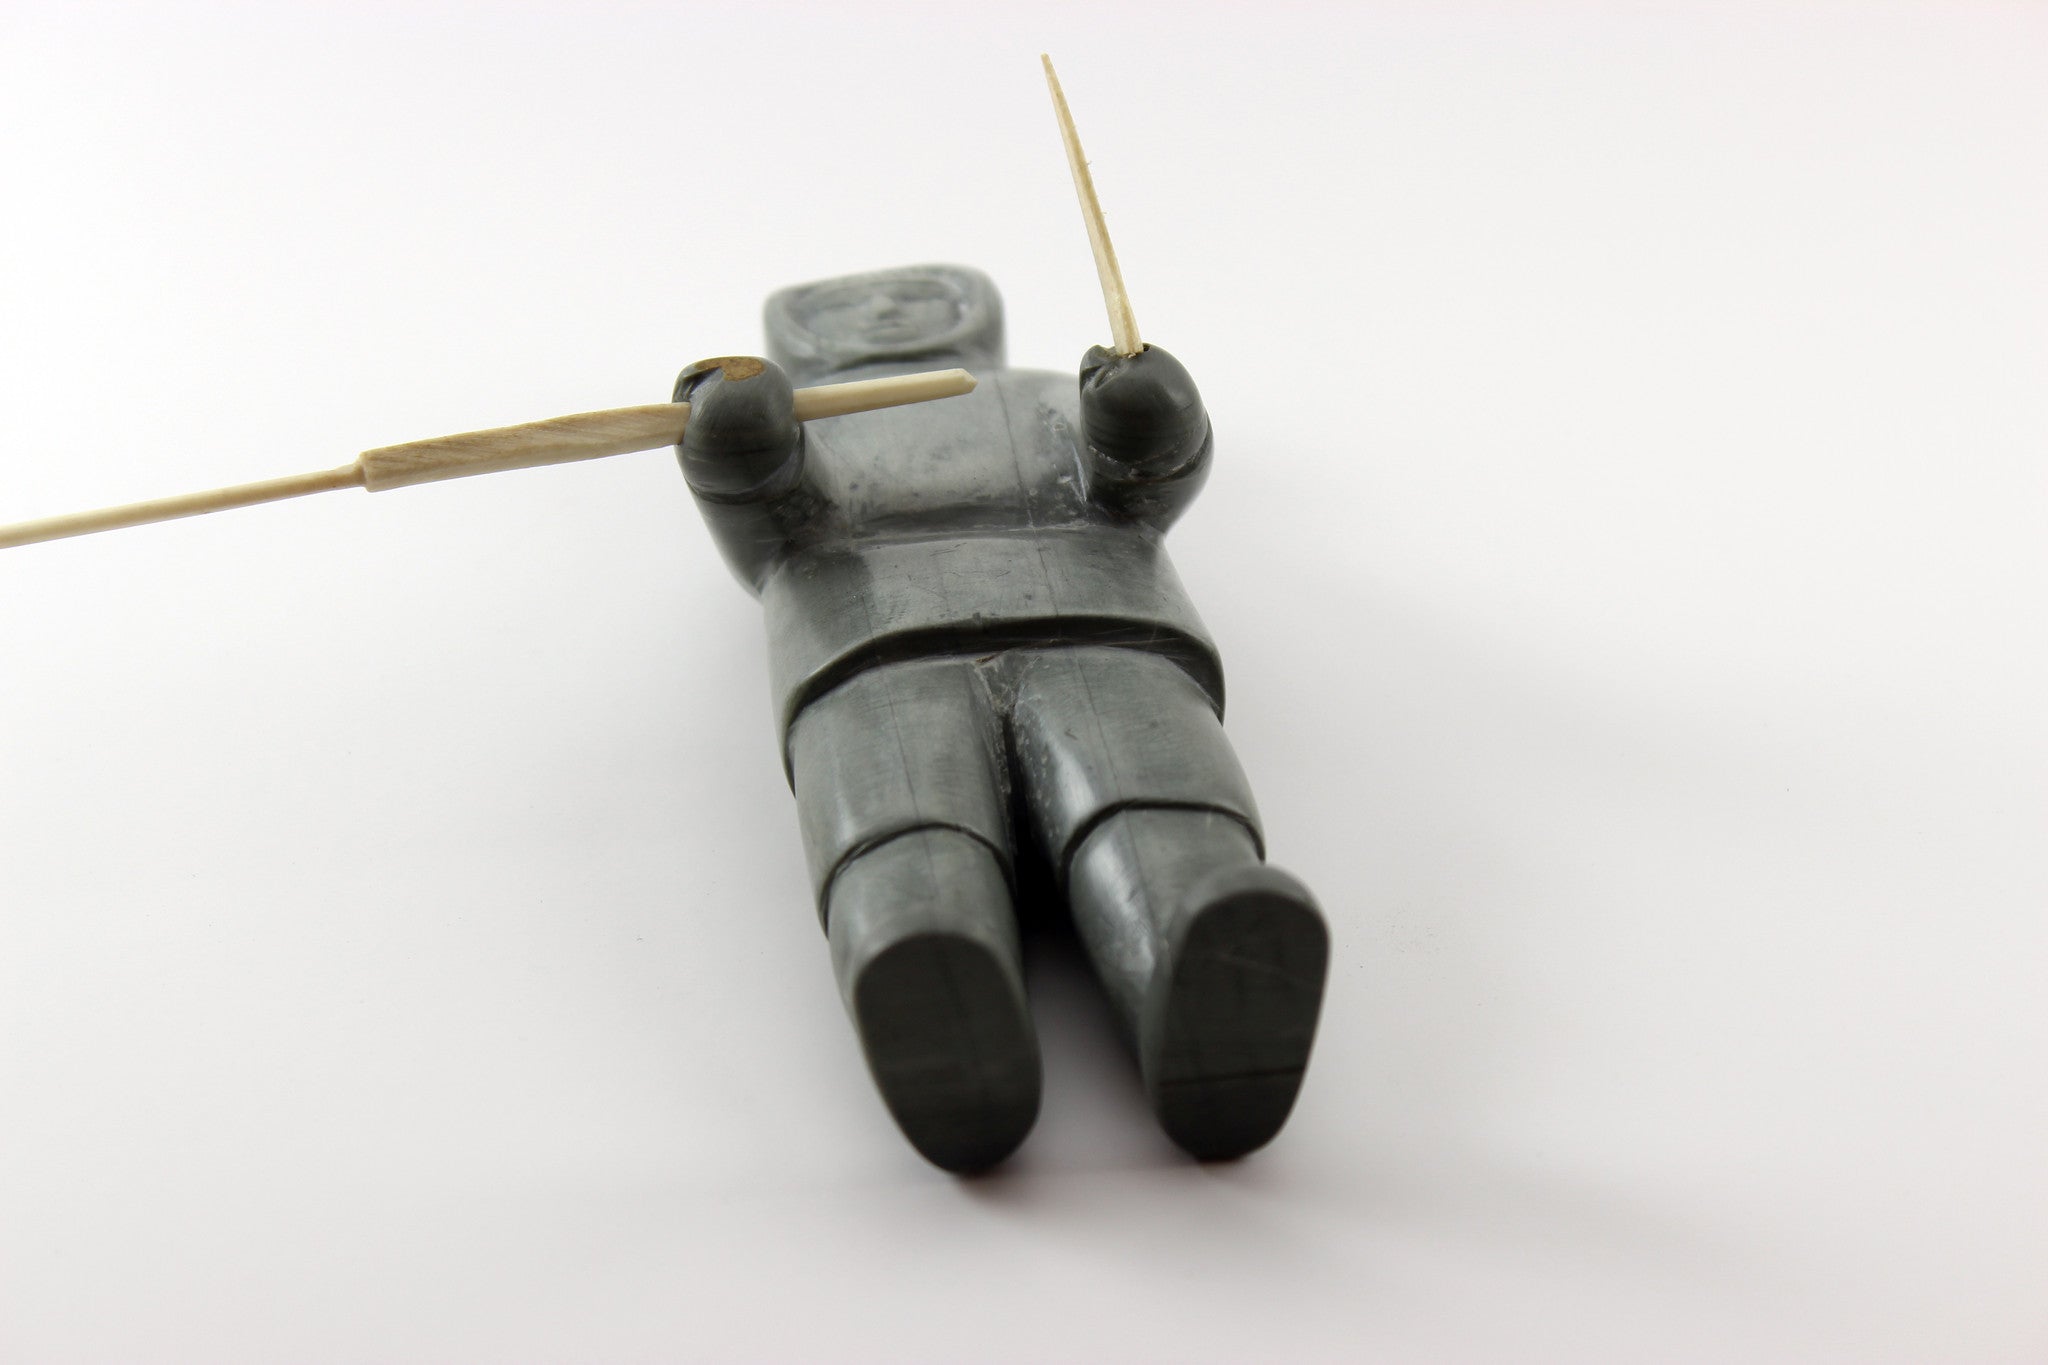 Inuit Soapstone Hunter with Knife and Spear